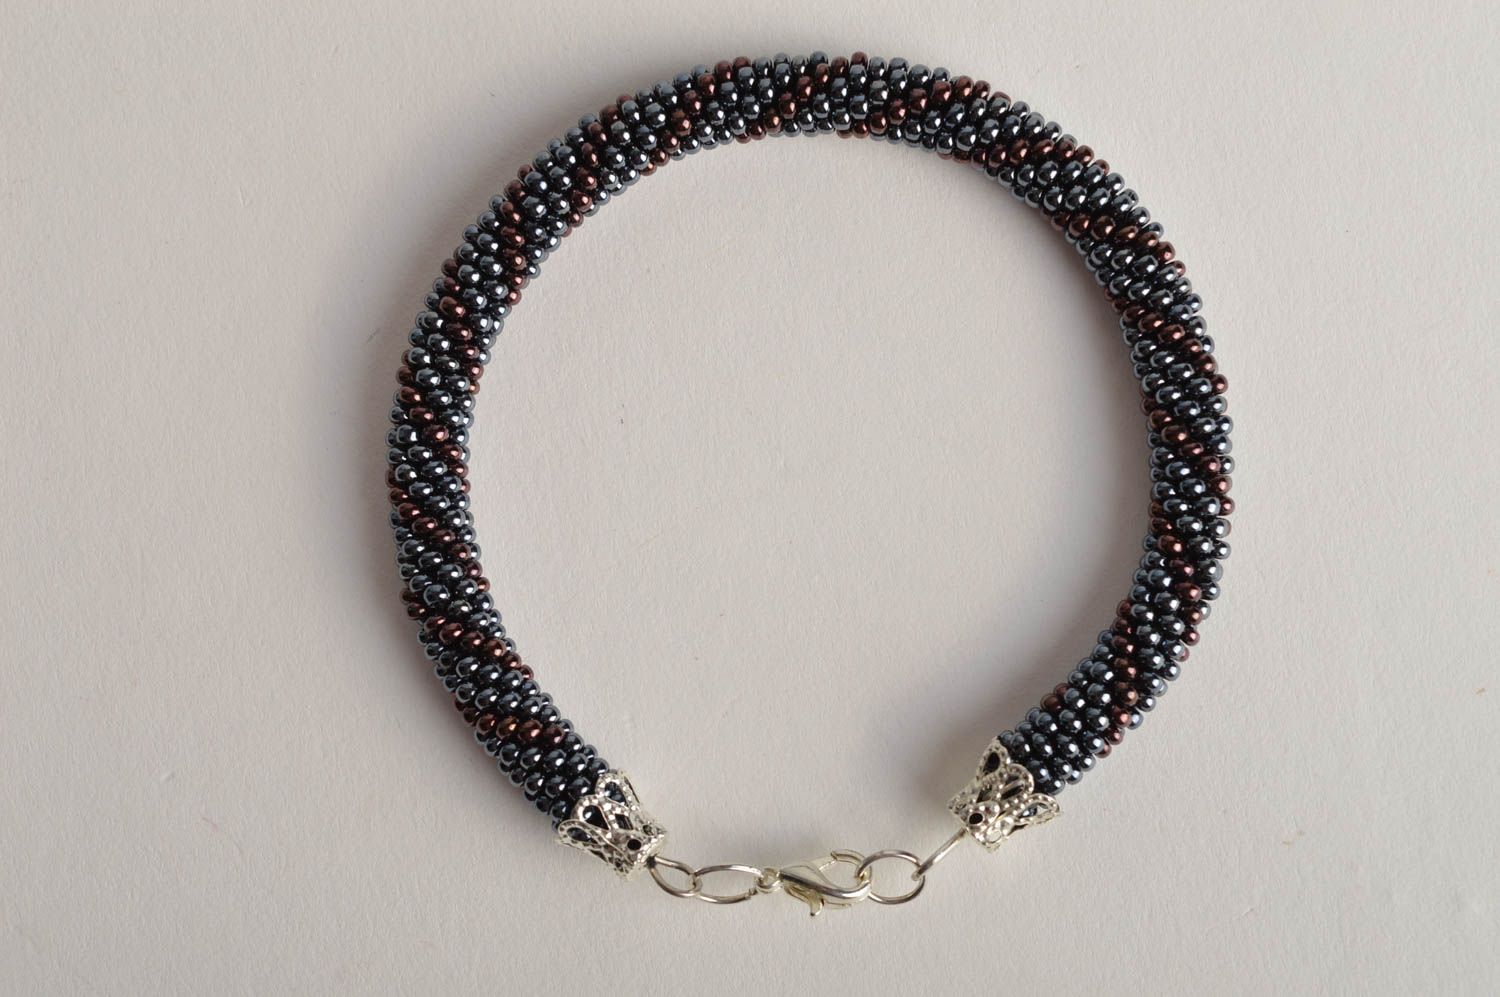 Handmade beaded cord bracelet in silver and dark cherry color photo 3